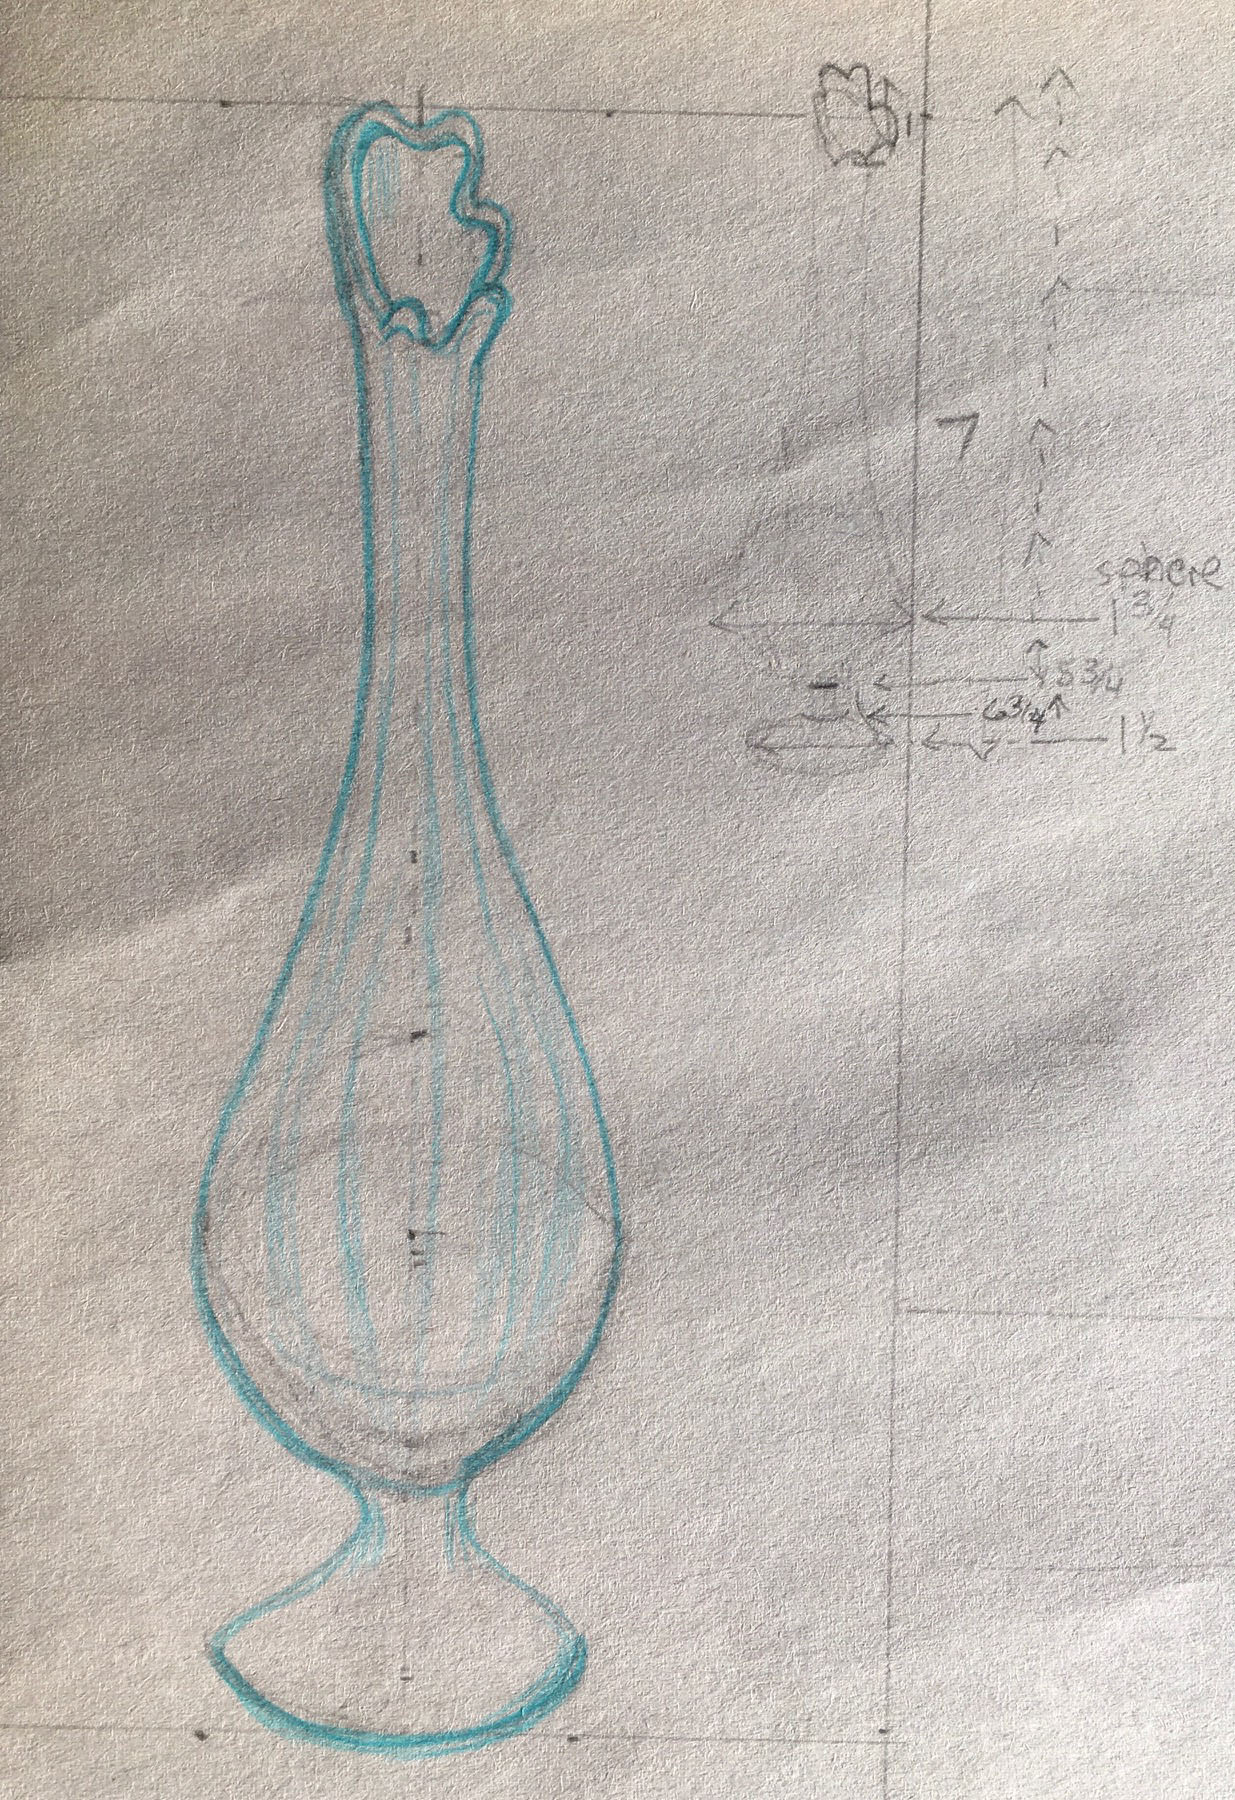 Blue Swung Vase, 2018
Pencil and Colored Pencil on Paper
8"W x 5"H, Walli White, artist